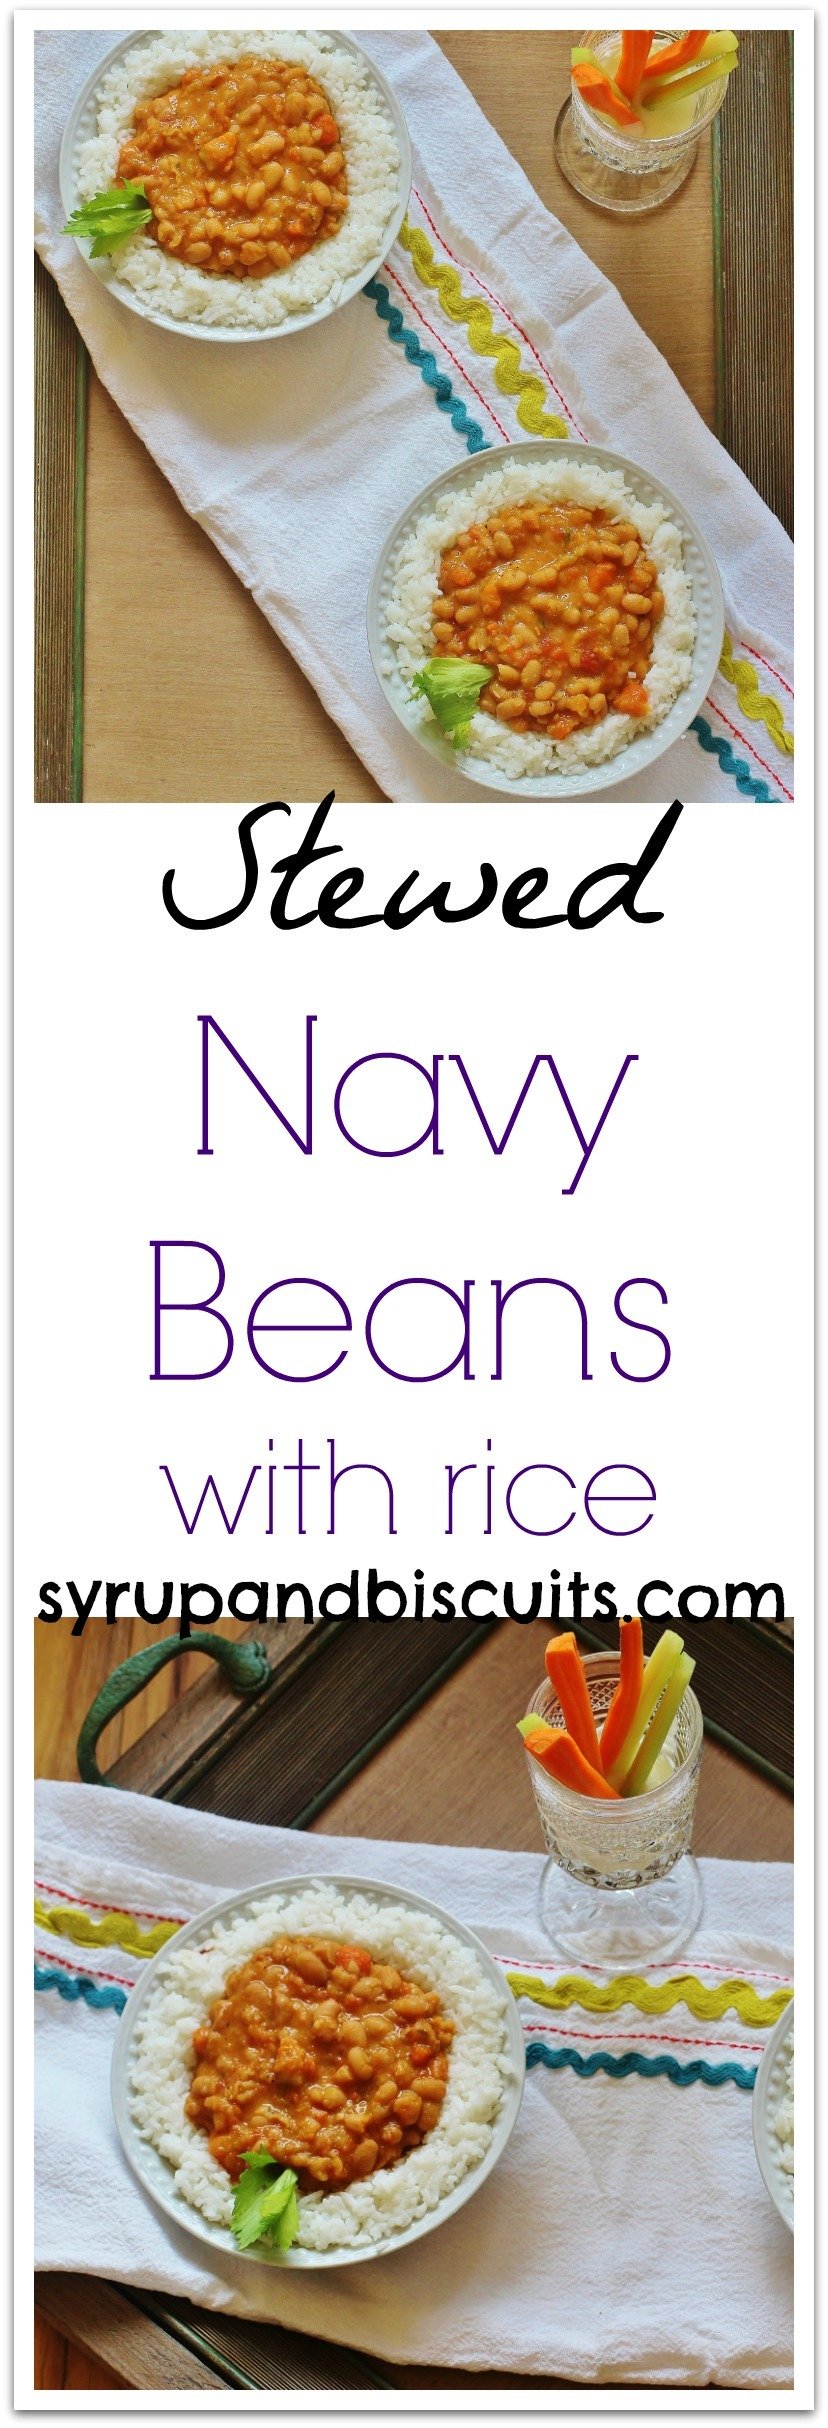 Stewed Navy Beans are best served with rice.  We prefer Basmati rice and it's the only kind I buy. #Stewed #NavyBeans